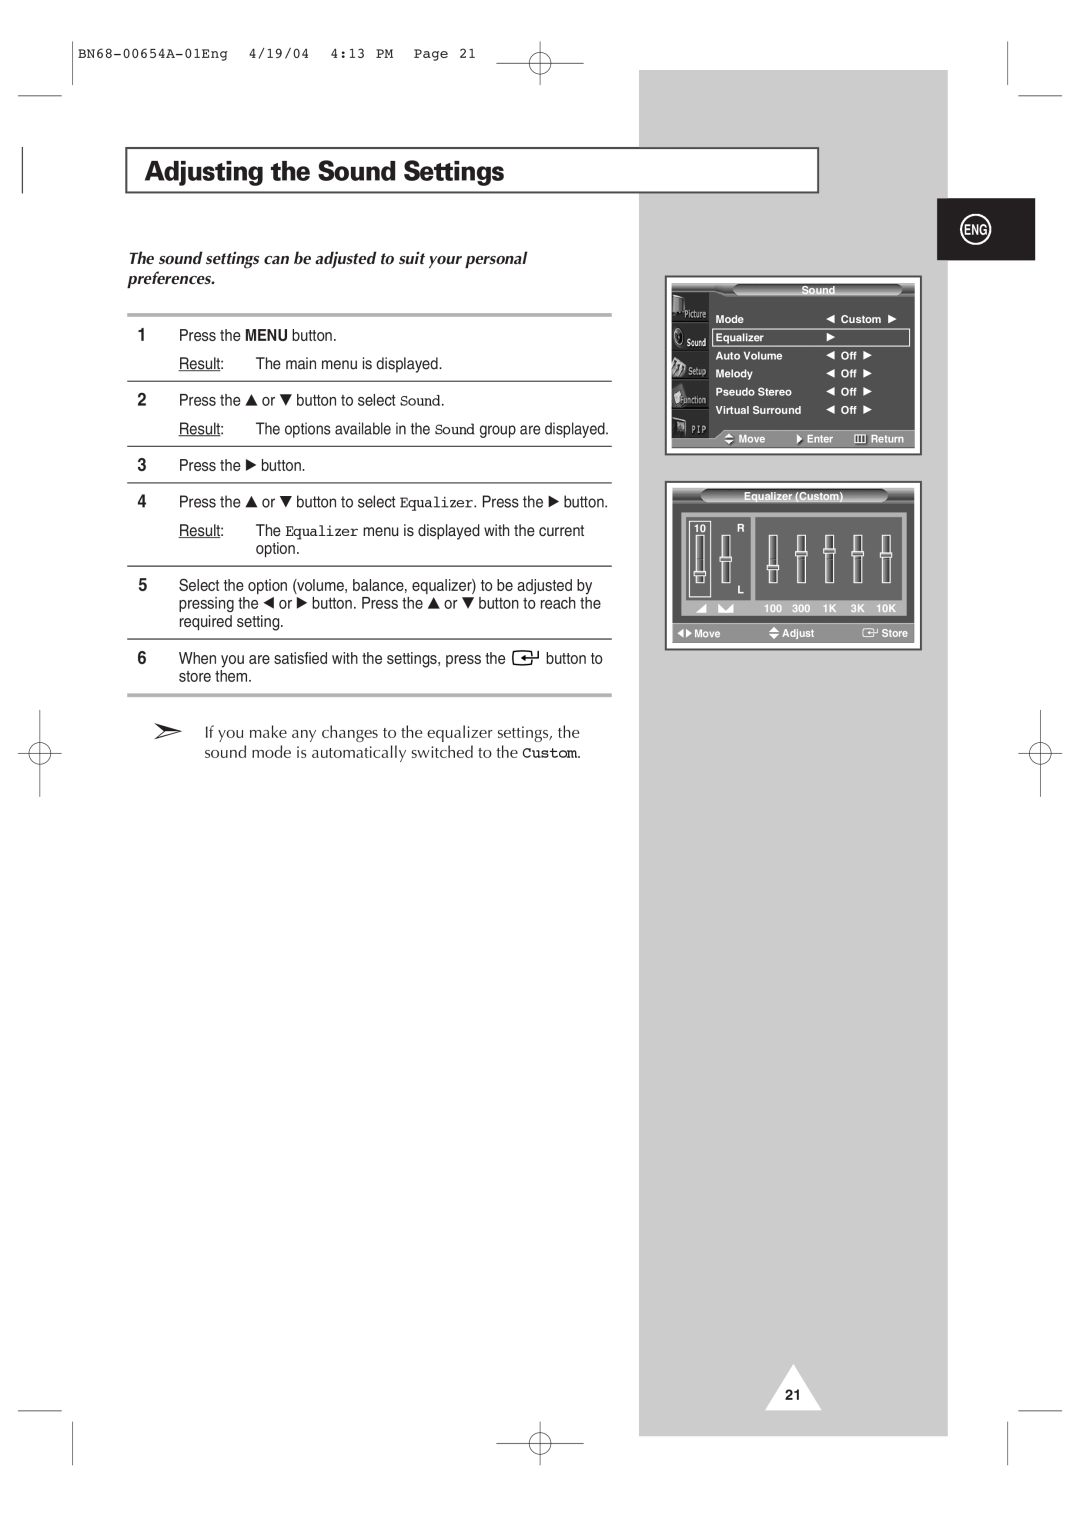 Samsung PPM 42S3Q manual Adjusting the Sound Settings, The sound settings can be adjusted to suit your personal preferences 